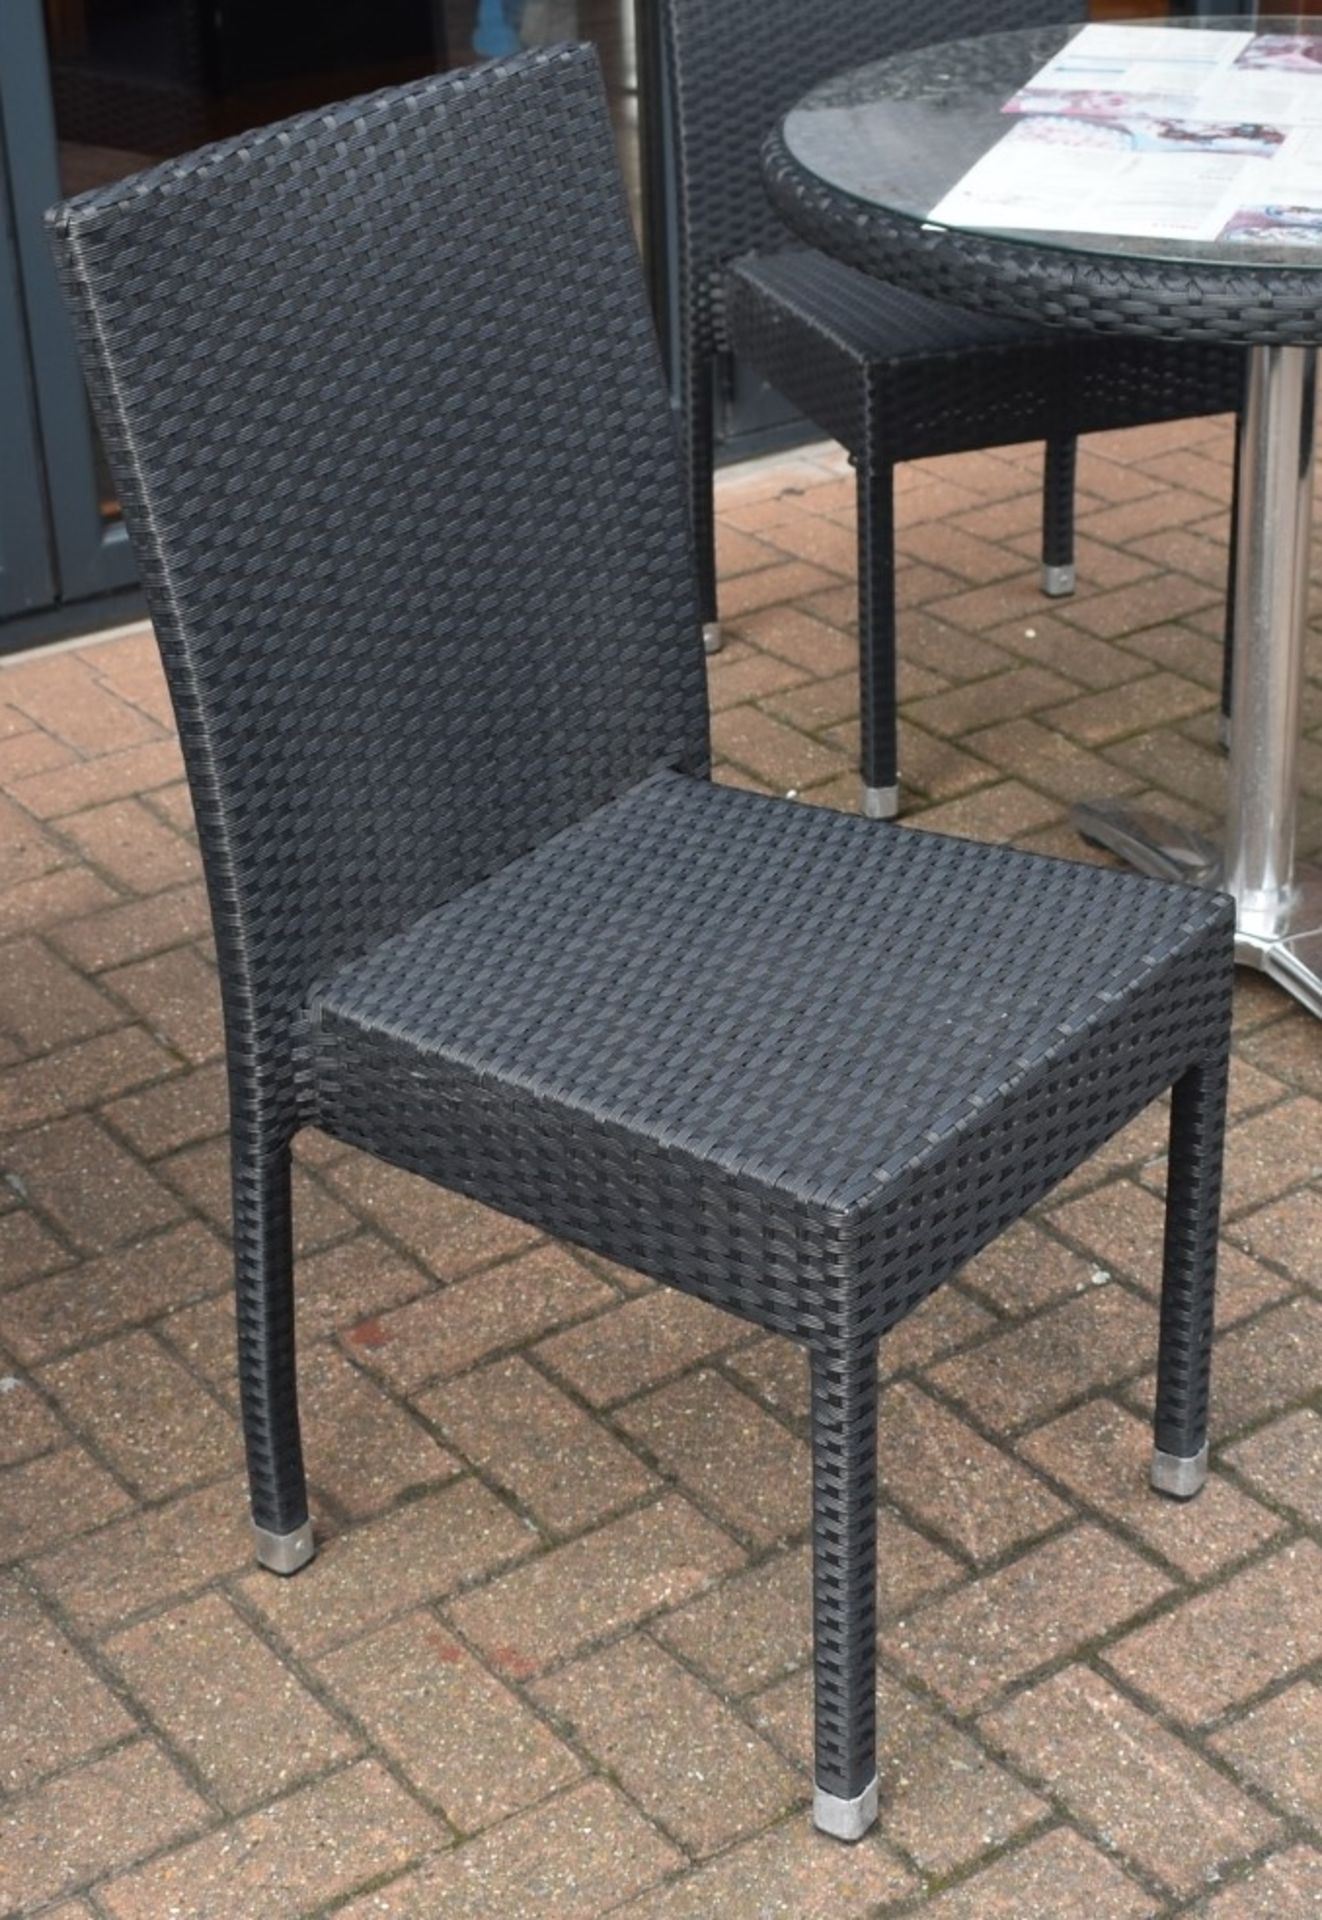 1 x Rattan Garden Table and Chair Set - Includes 1 x Square Rattan Table With Chrome Base and - Image 2 of 8